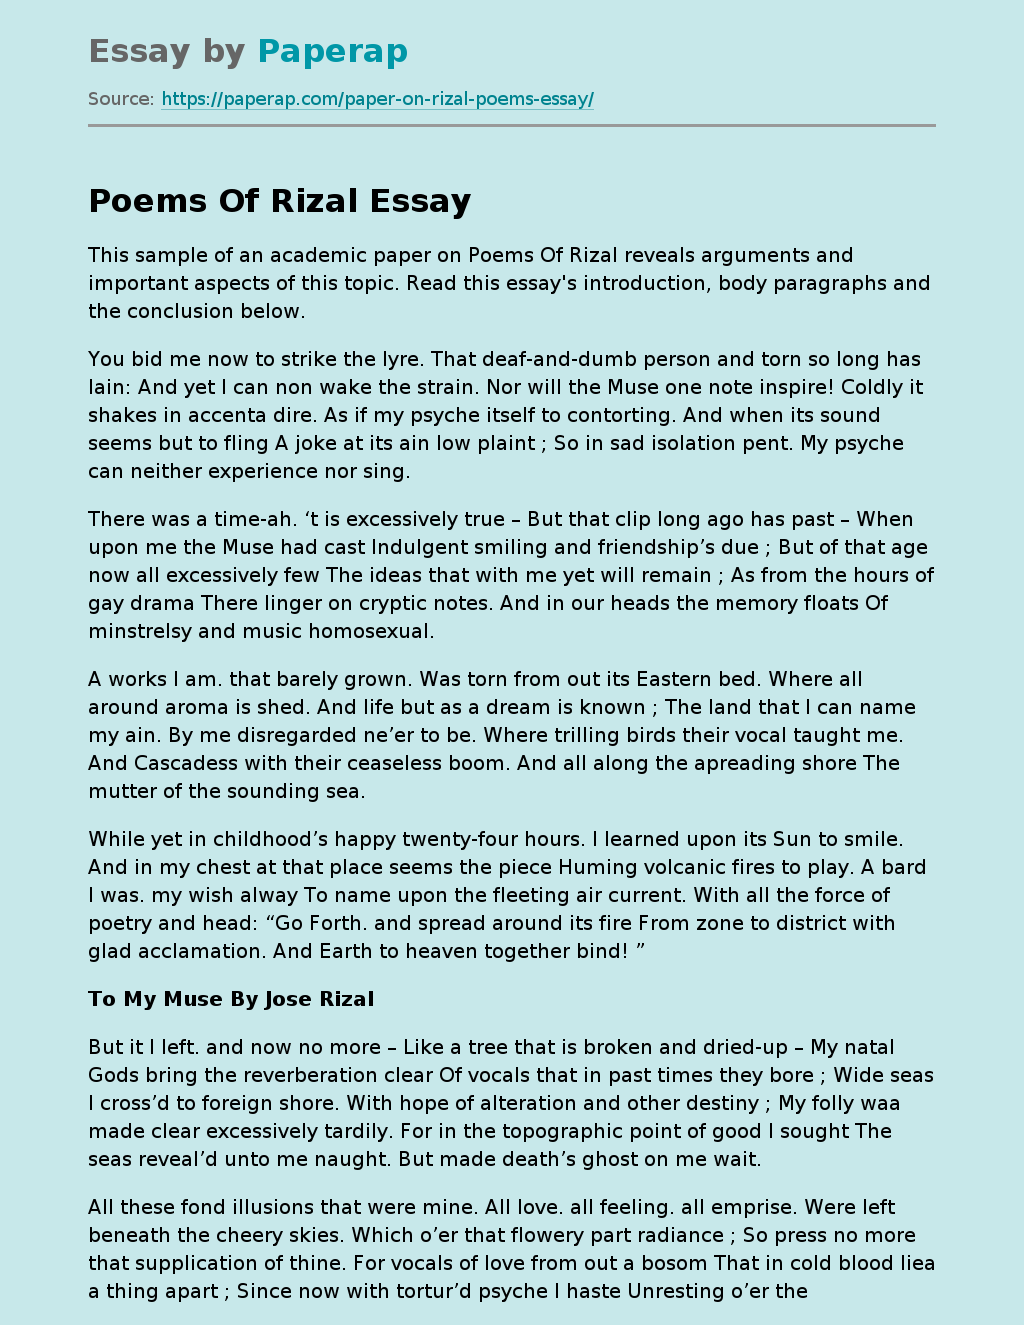 Poems of Rizal: Analysis and Discussion